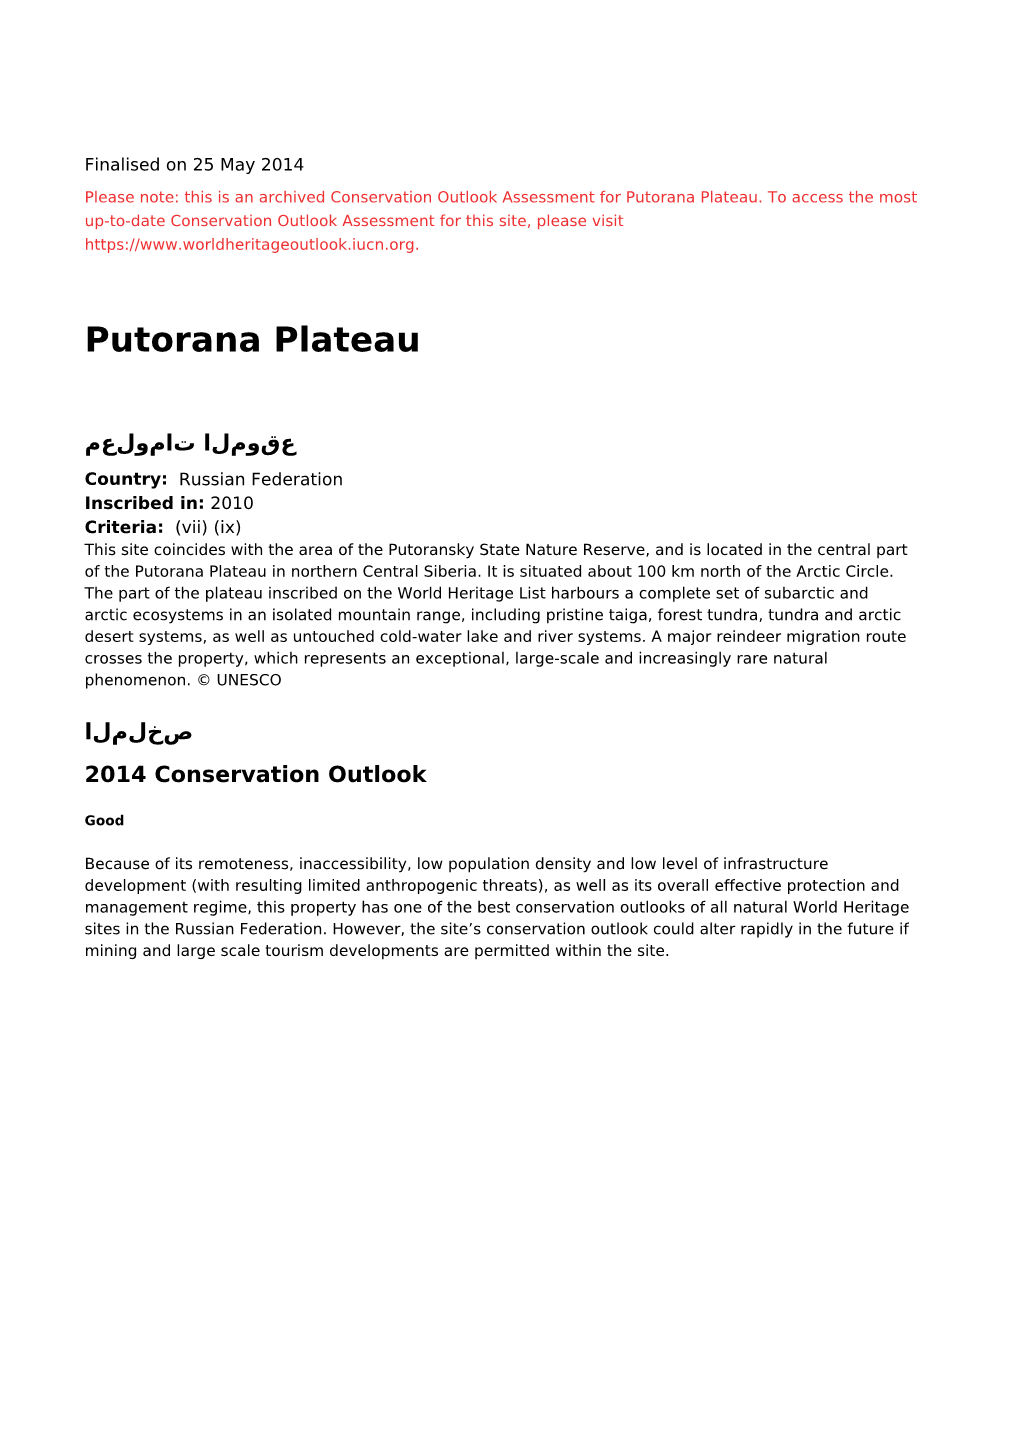 Putorana Plateau - 2014 Conservation Outlook Assessment (Archived)